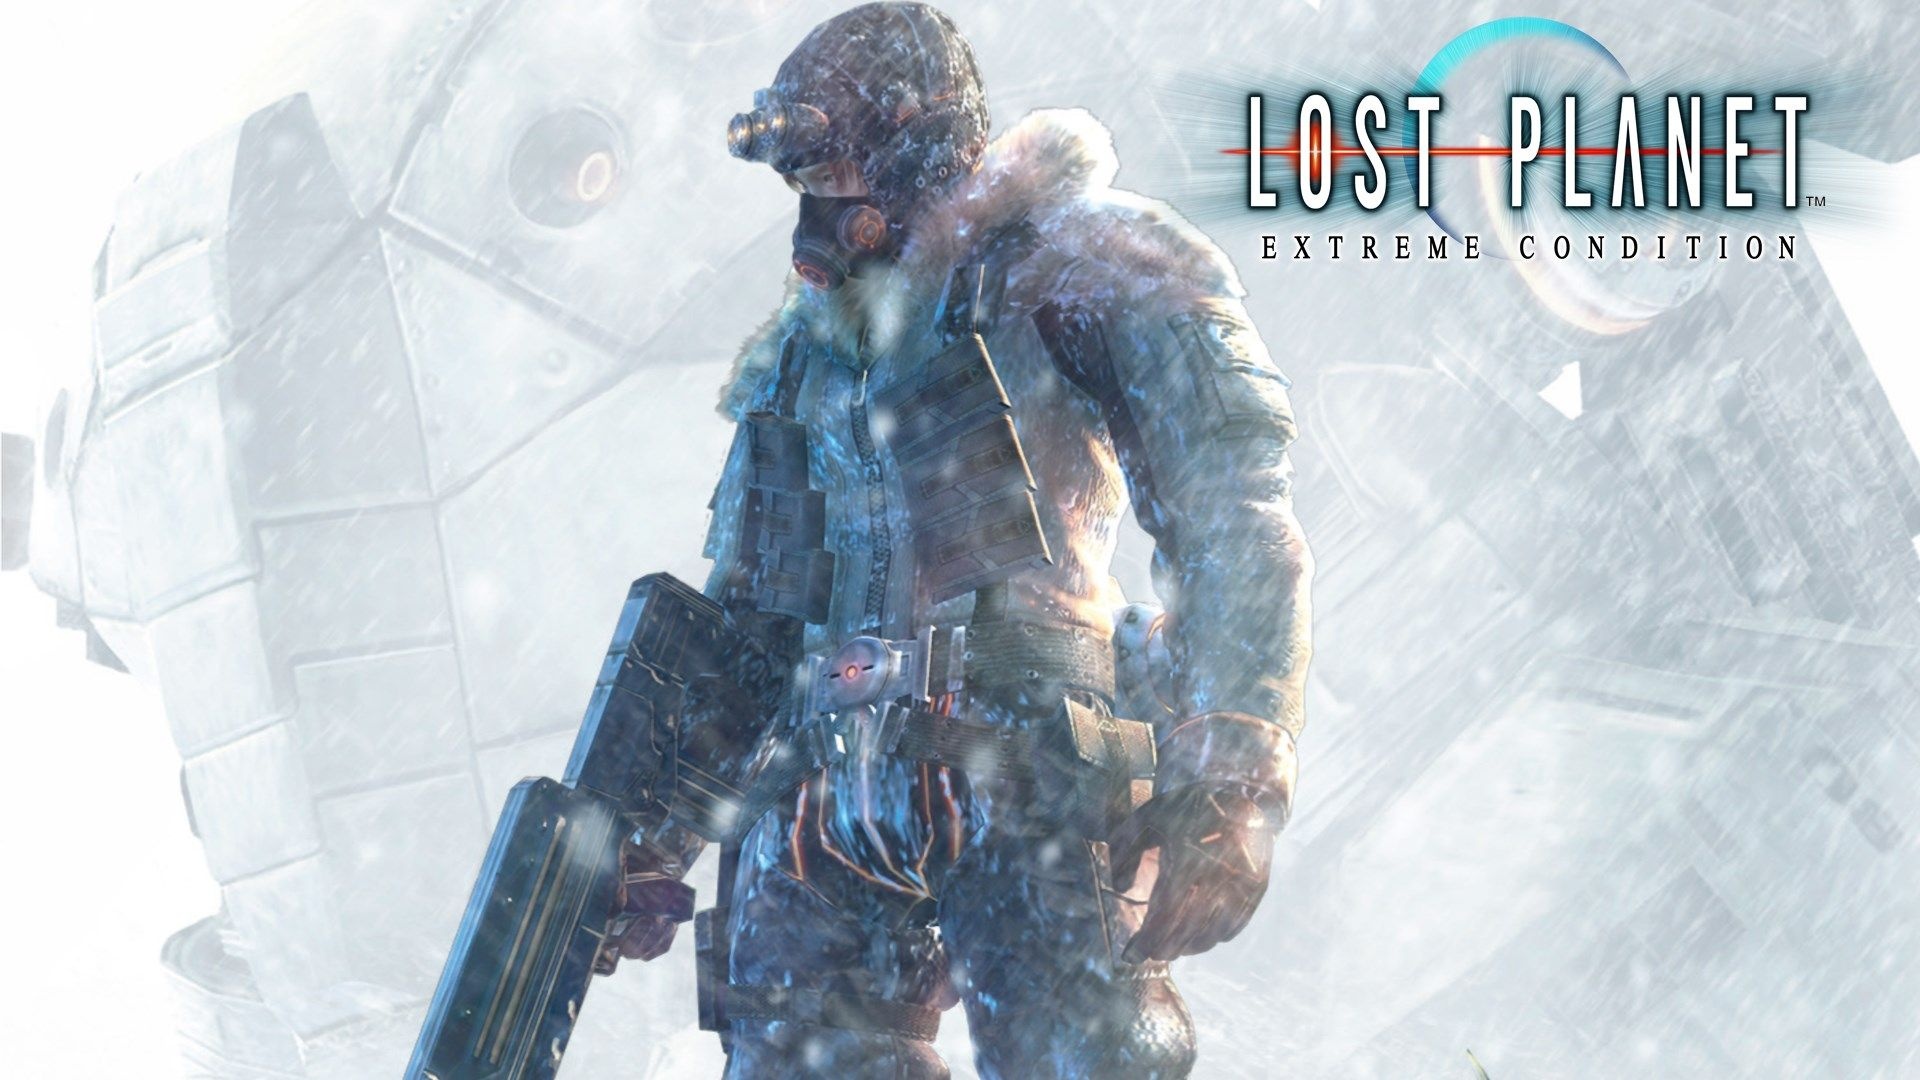 Lost Planet 3, Free backgrounds, Lost Planet 3 wallpapers, Action adventure, 1920x1080 Full HD Desktop